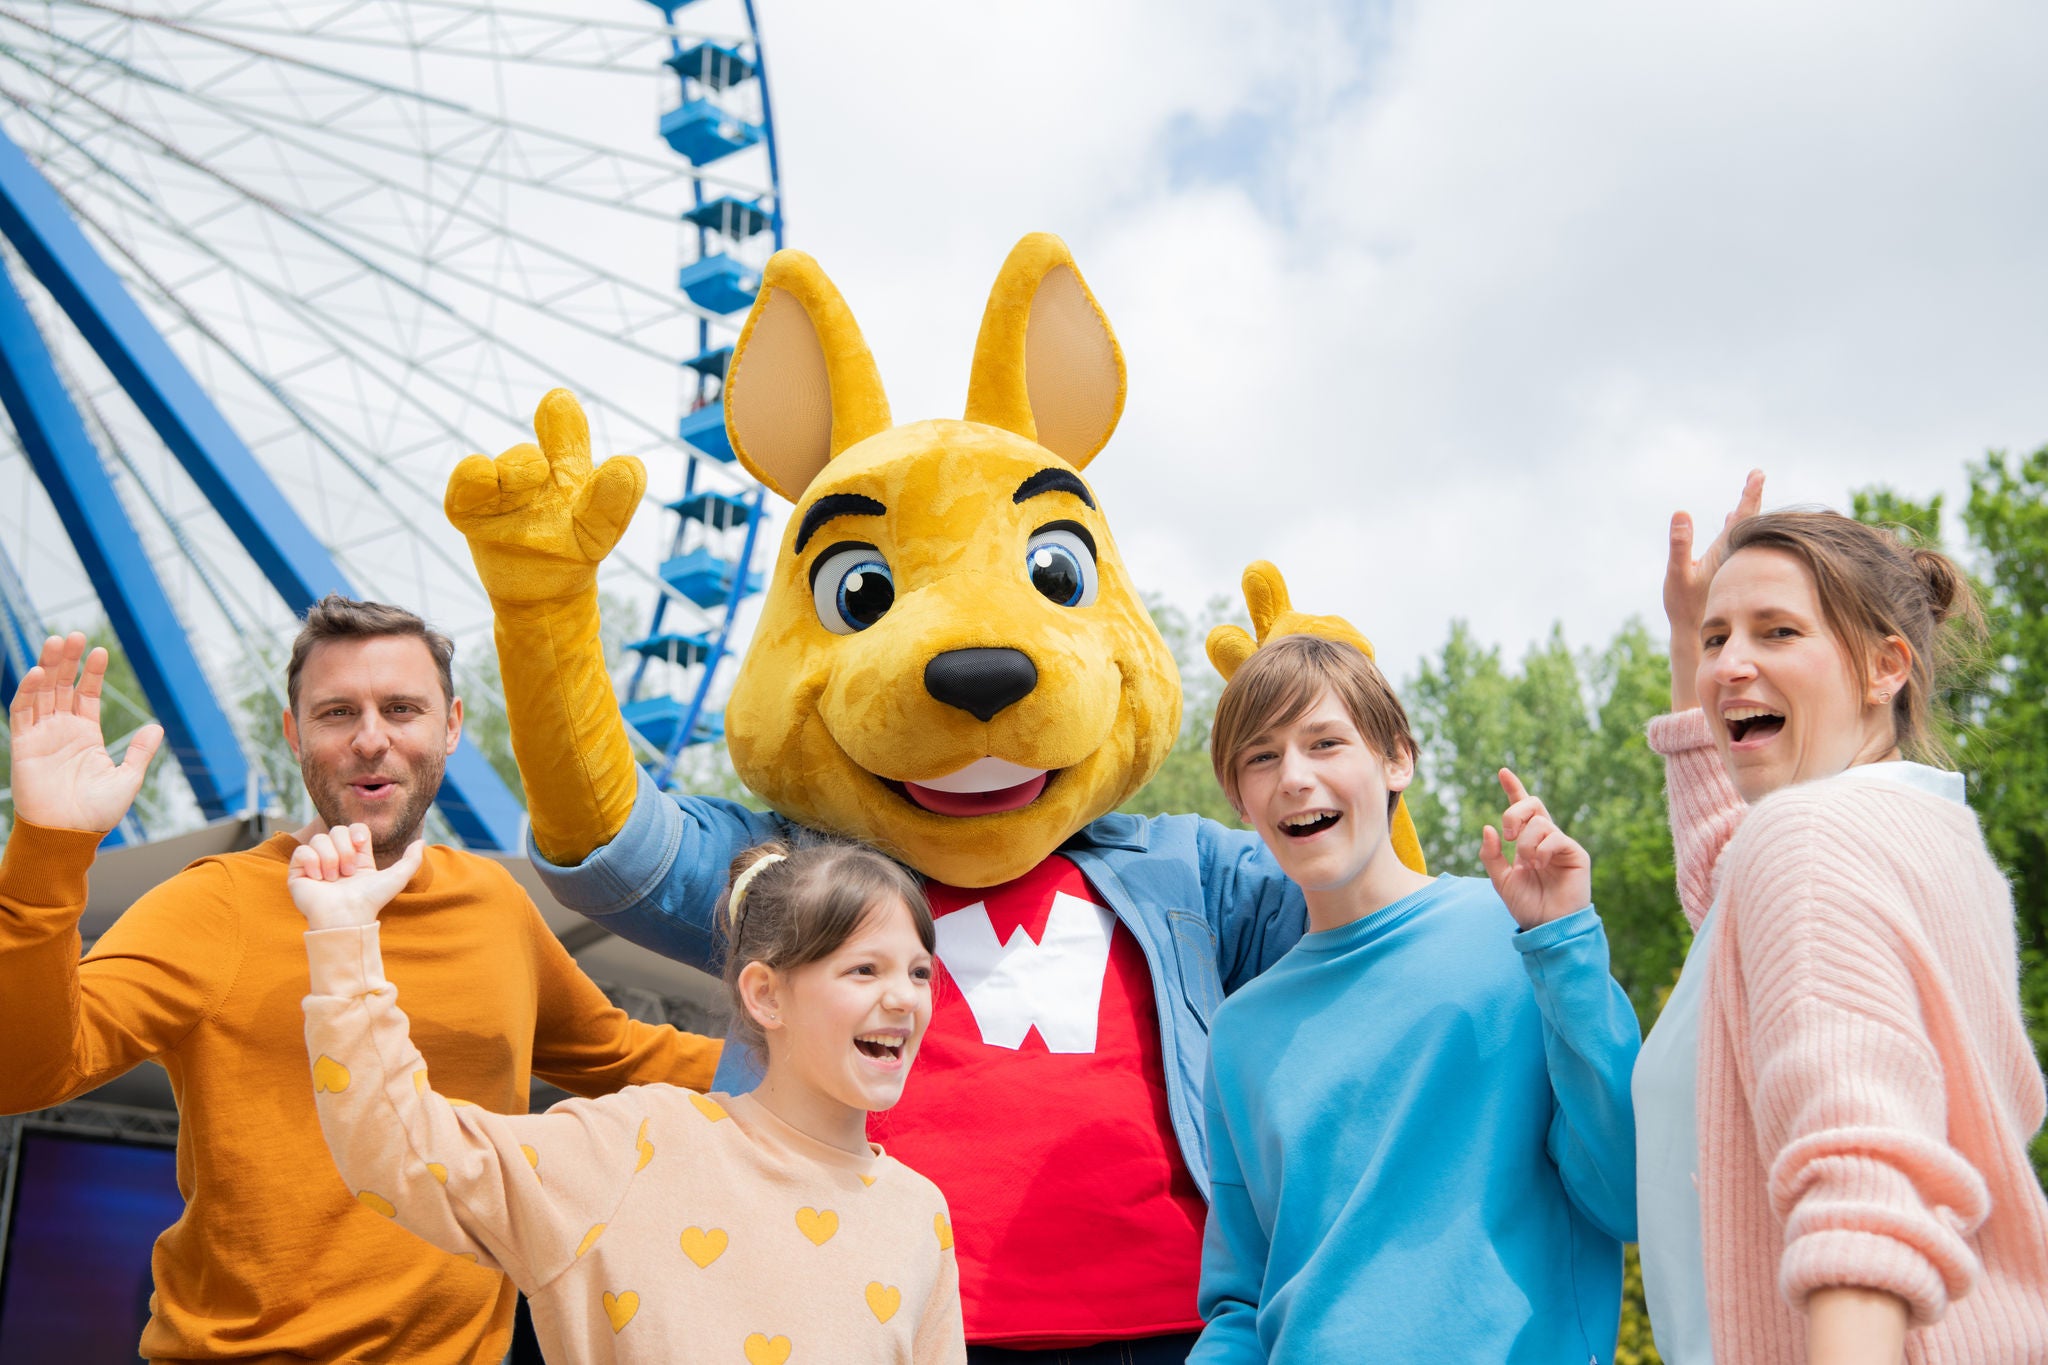 Benefits of staying overnight at Walibi Village - Free admission to the park